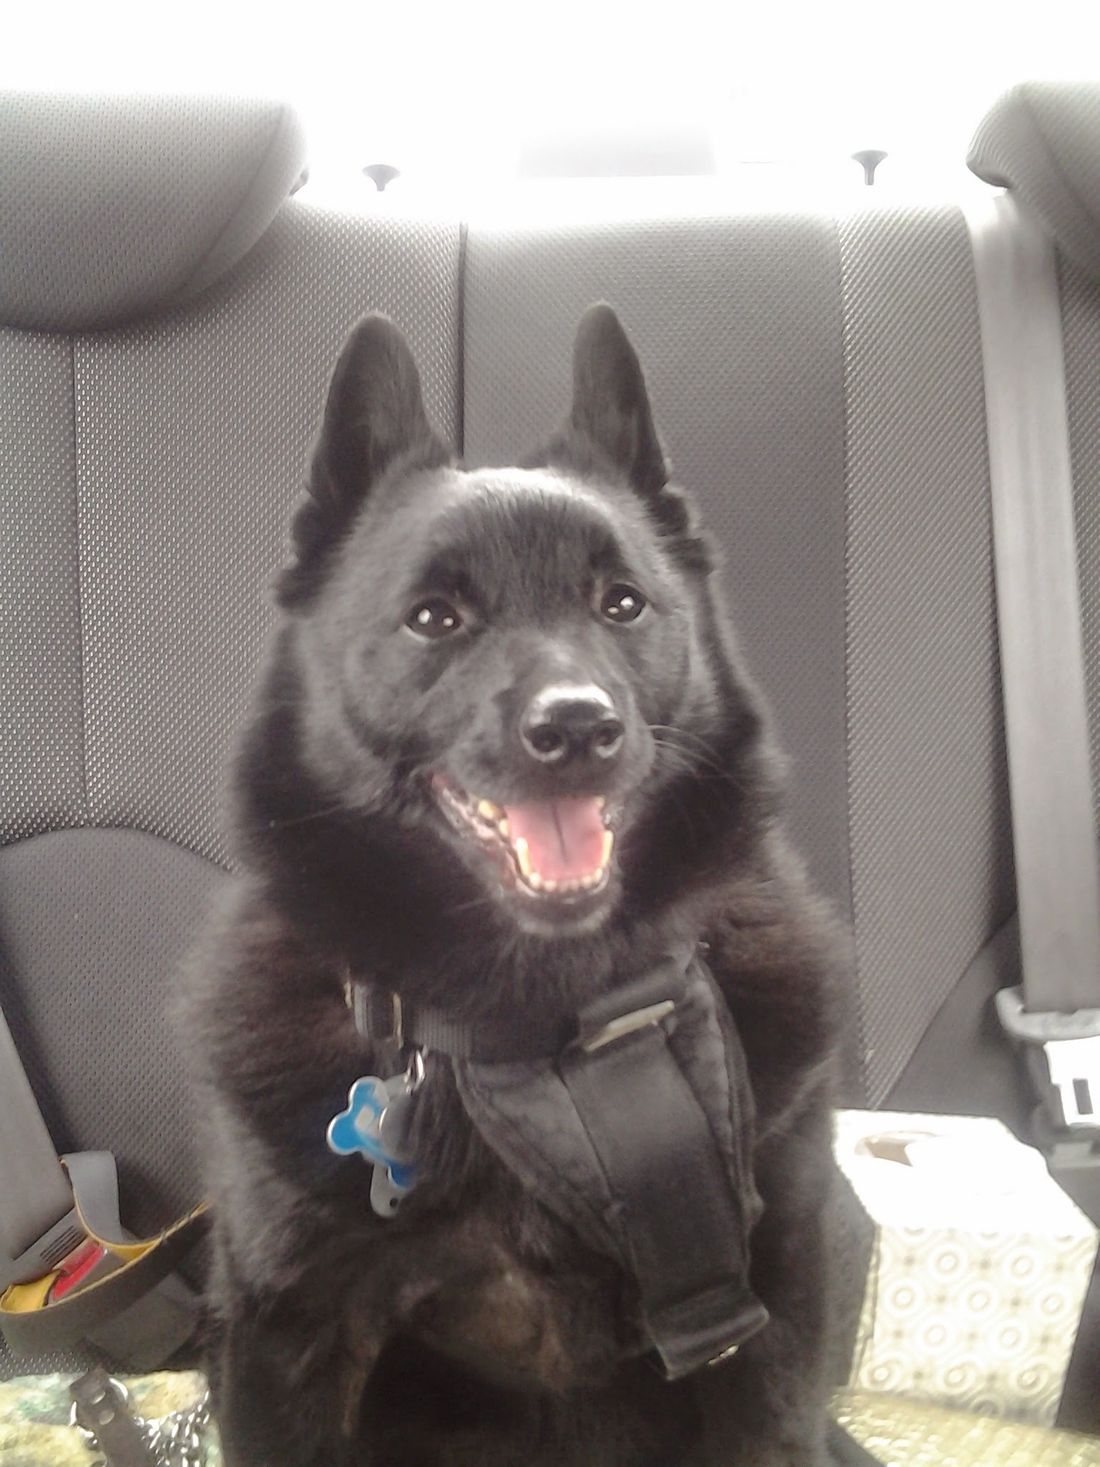 Here is a picture of Raven, our 8-year-old Schipperke. He was purchased from Kelbri Schipperkes in 2007, strictly as a personal pet. (companion/performance dog) He was Sired by: Ch Kelbri’s Toy Soldier , Out of: Ch Kelbri’s Socialite.  Raven has an impressive pedigree. We adore him! He has a lovely temperament, and friendly. Submitted by Darcy Pilawski
